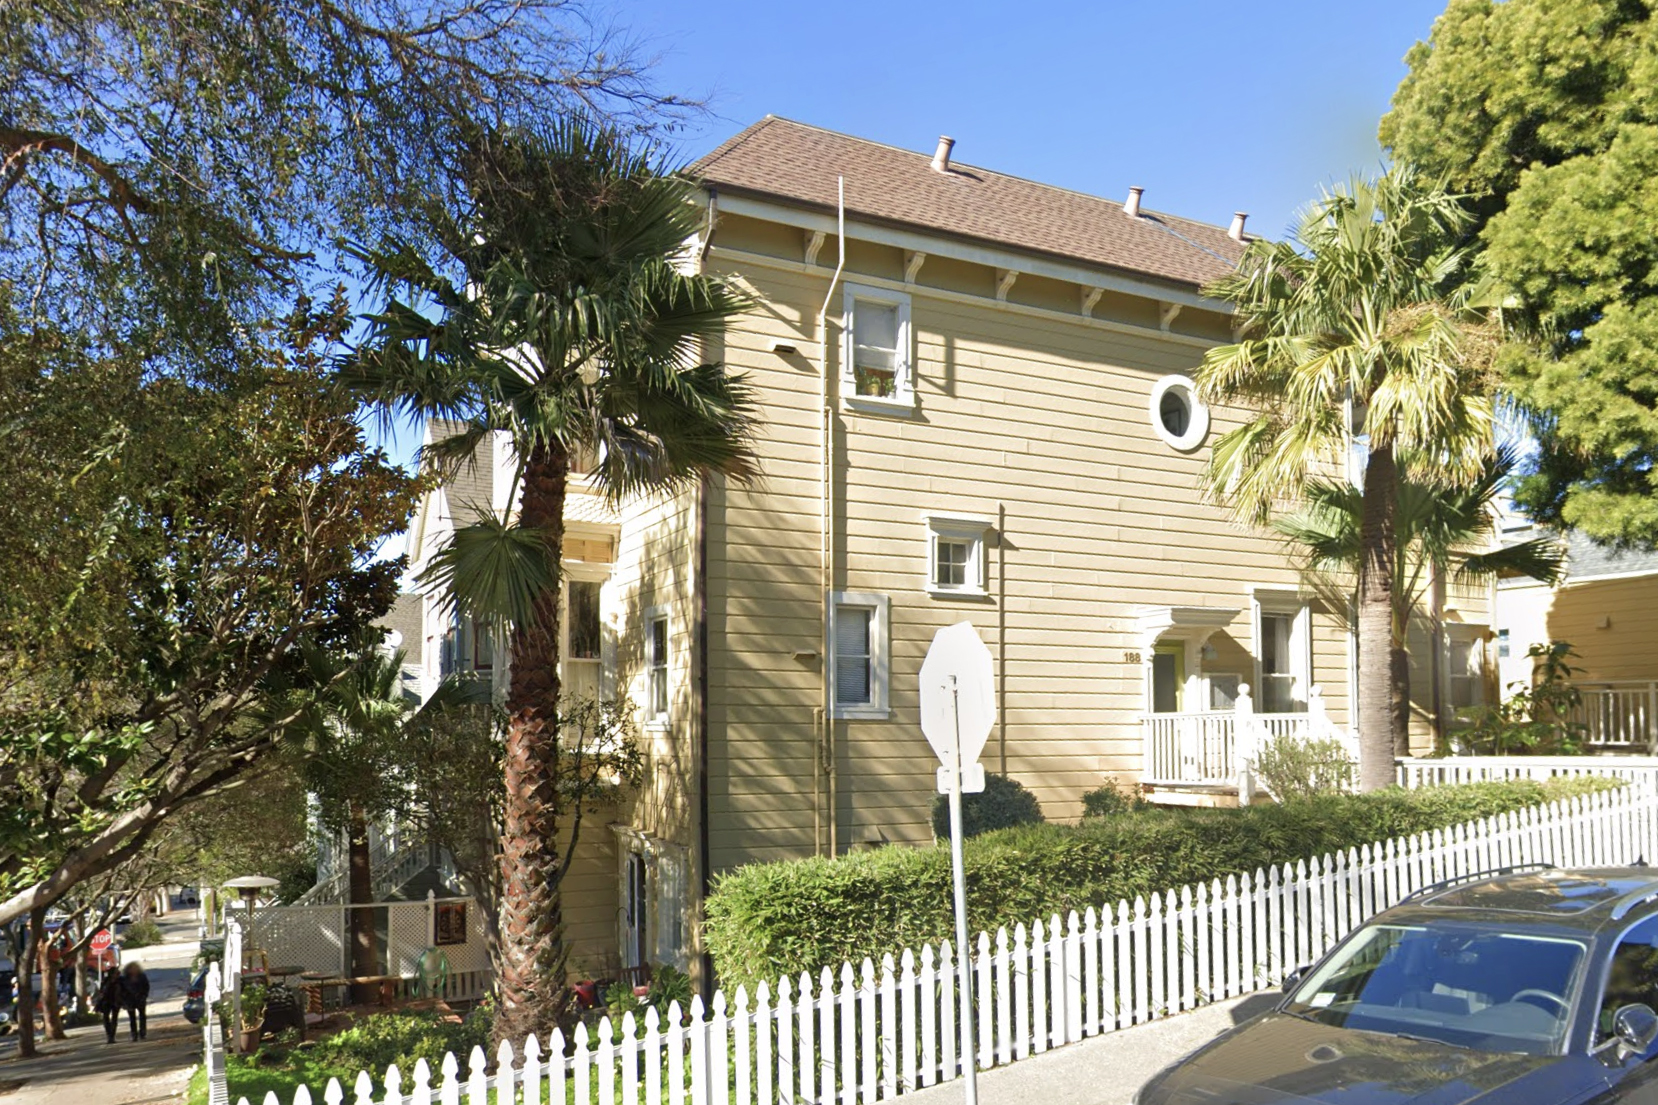 A beige two-story house with a white picket fence, surrounded by palm trees, under a clear blue sky.